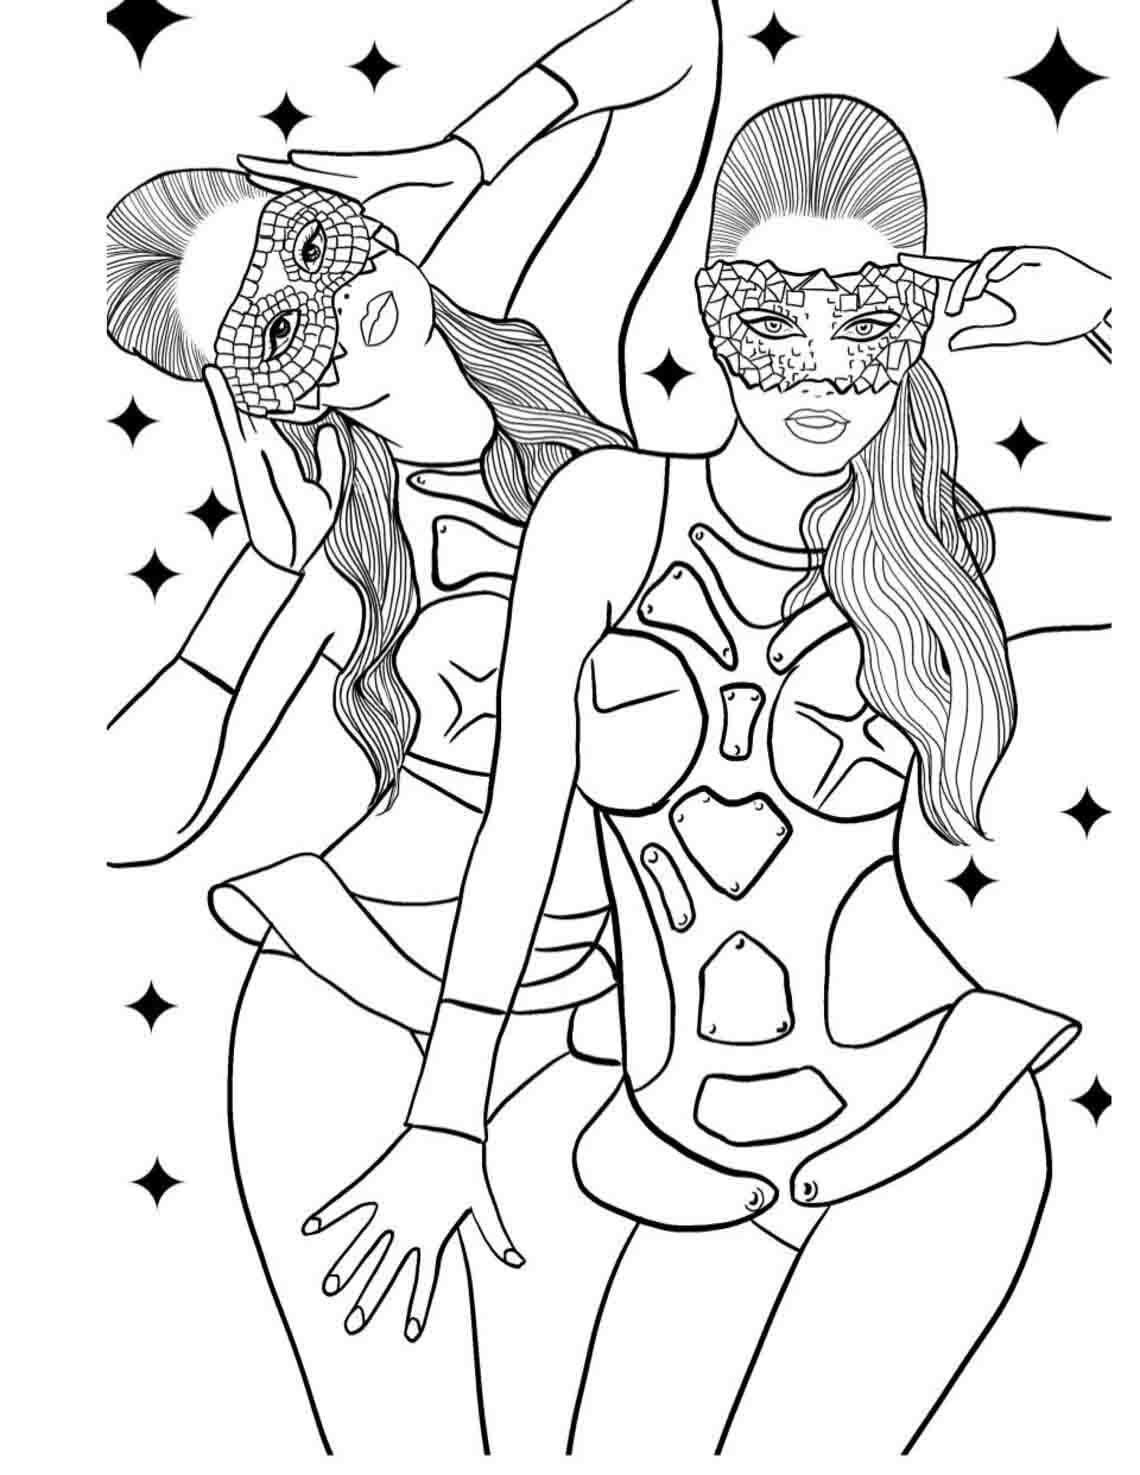 A page from the Bodies In Motion Coloring Book that has two masked dancers wearing matching outfits.